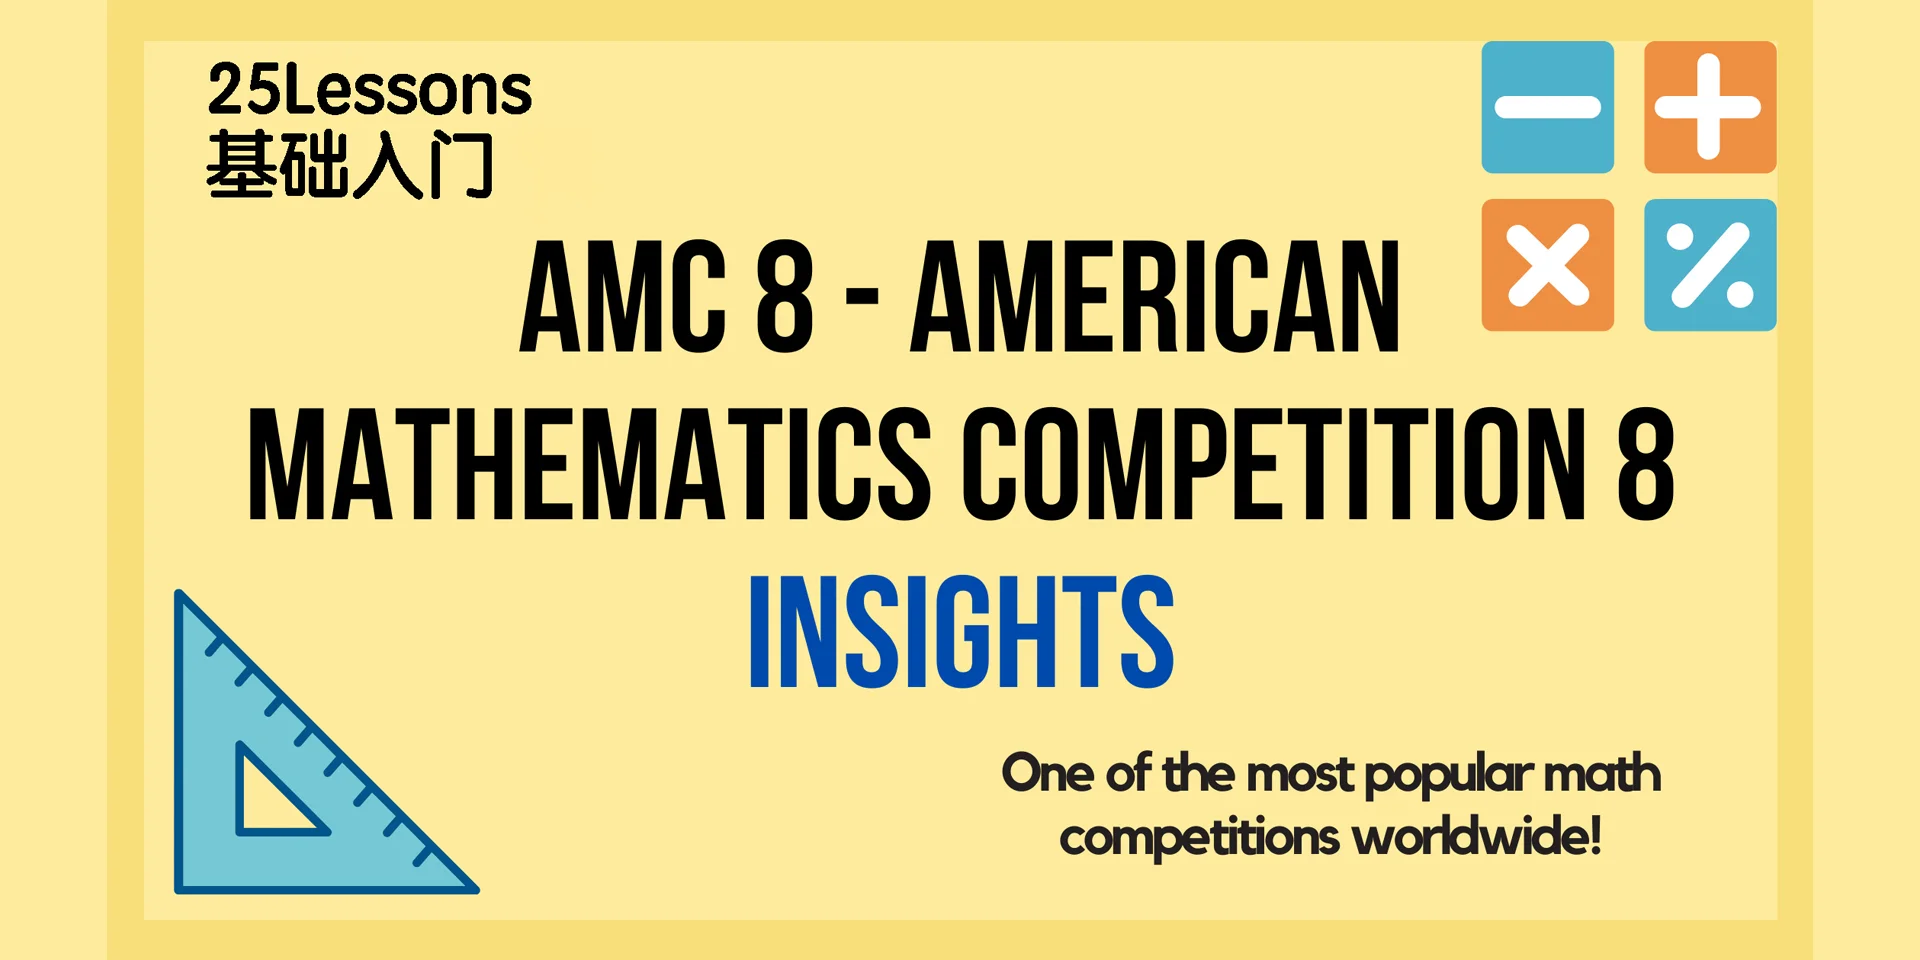 AMC8基础入门 American Mathematics Competitions 8, is a middle school-level mathematics competition in the United States. It is designed for students in grades 6, 7, and 8.